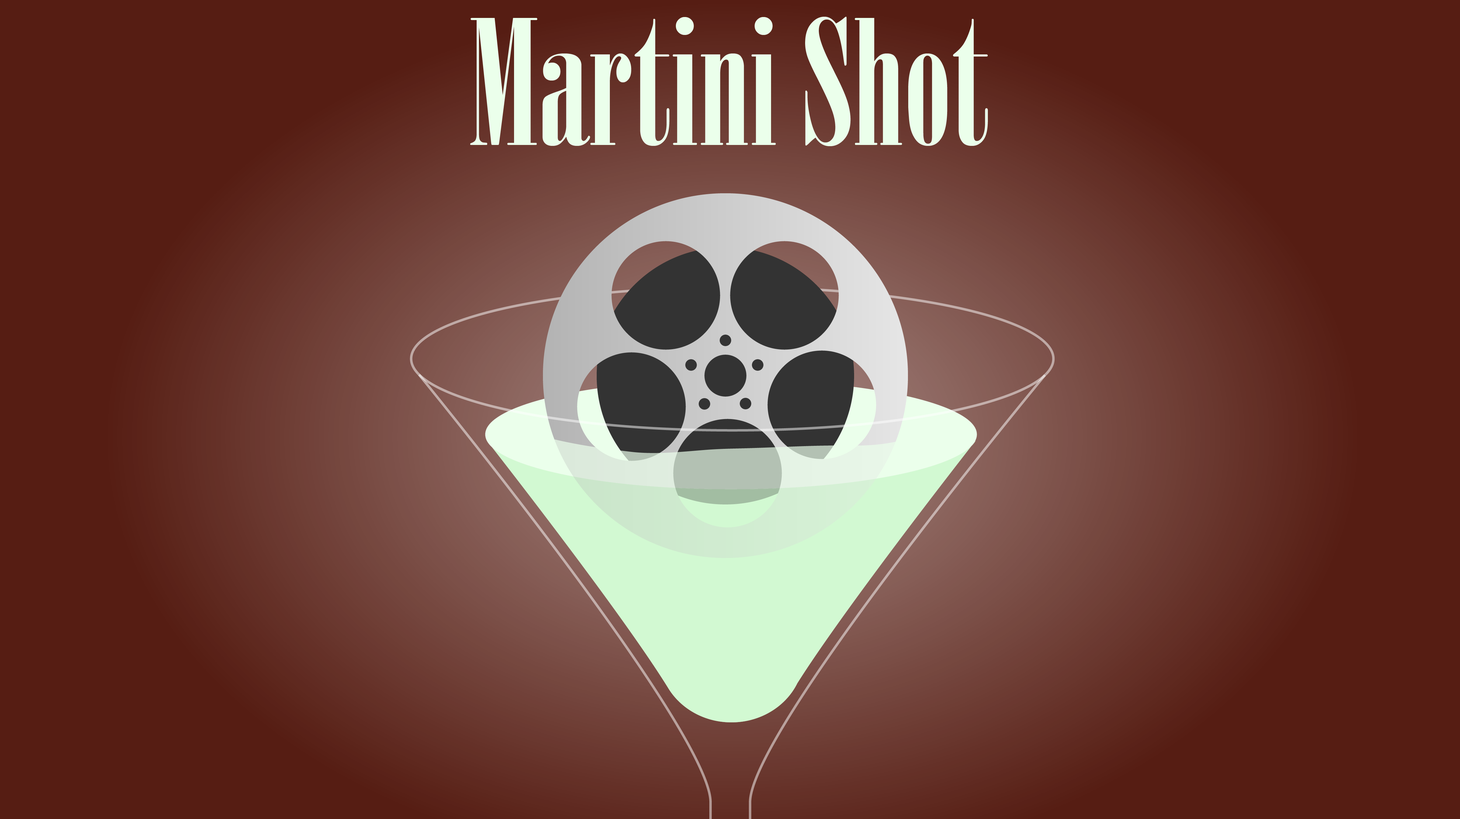 This is Rob Long and on today’s Martini Shot I hypothetically and with names changed, explore some of the ways writers get scripts written, from Adderall to ten micrograms of LSD, everything but just sitting down and doing the work.